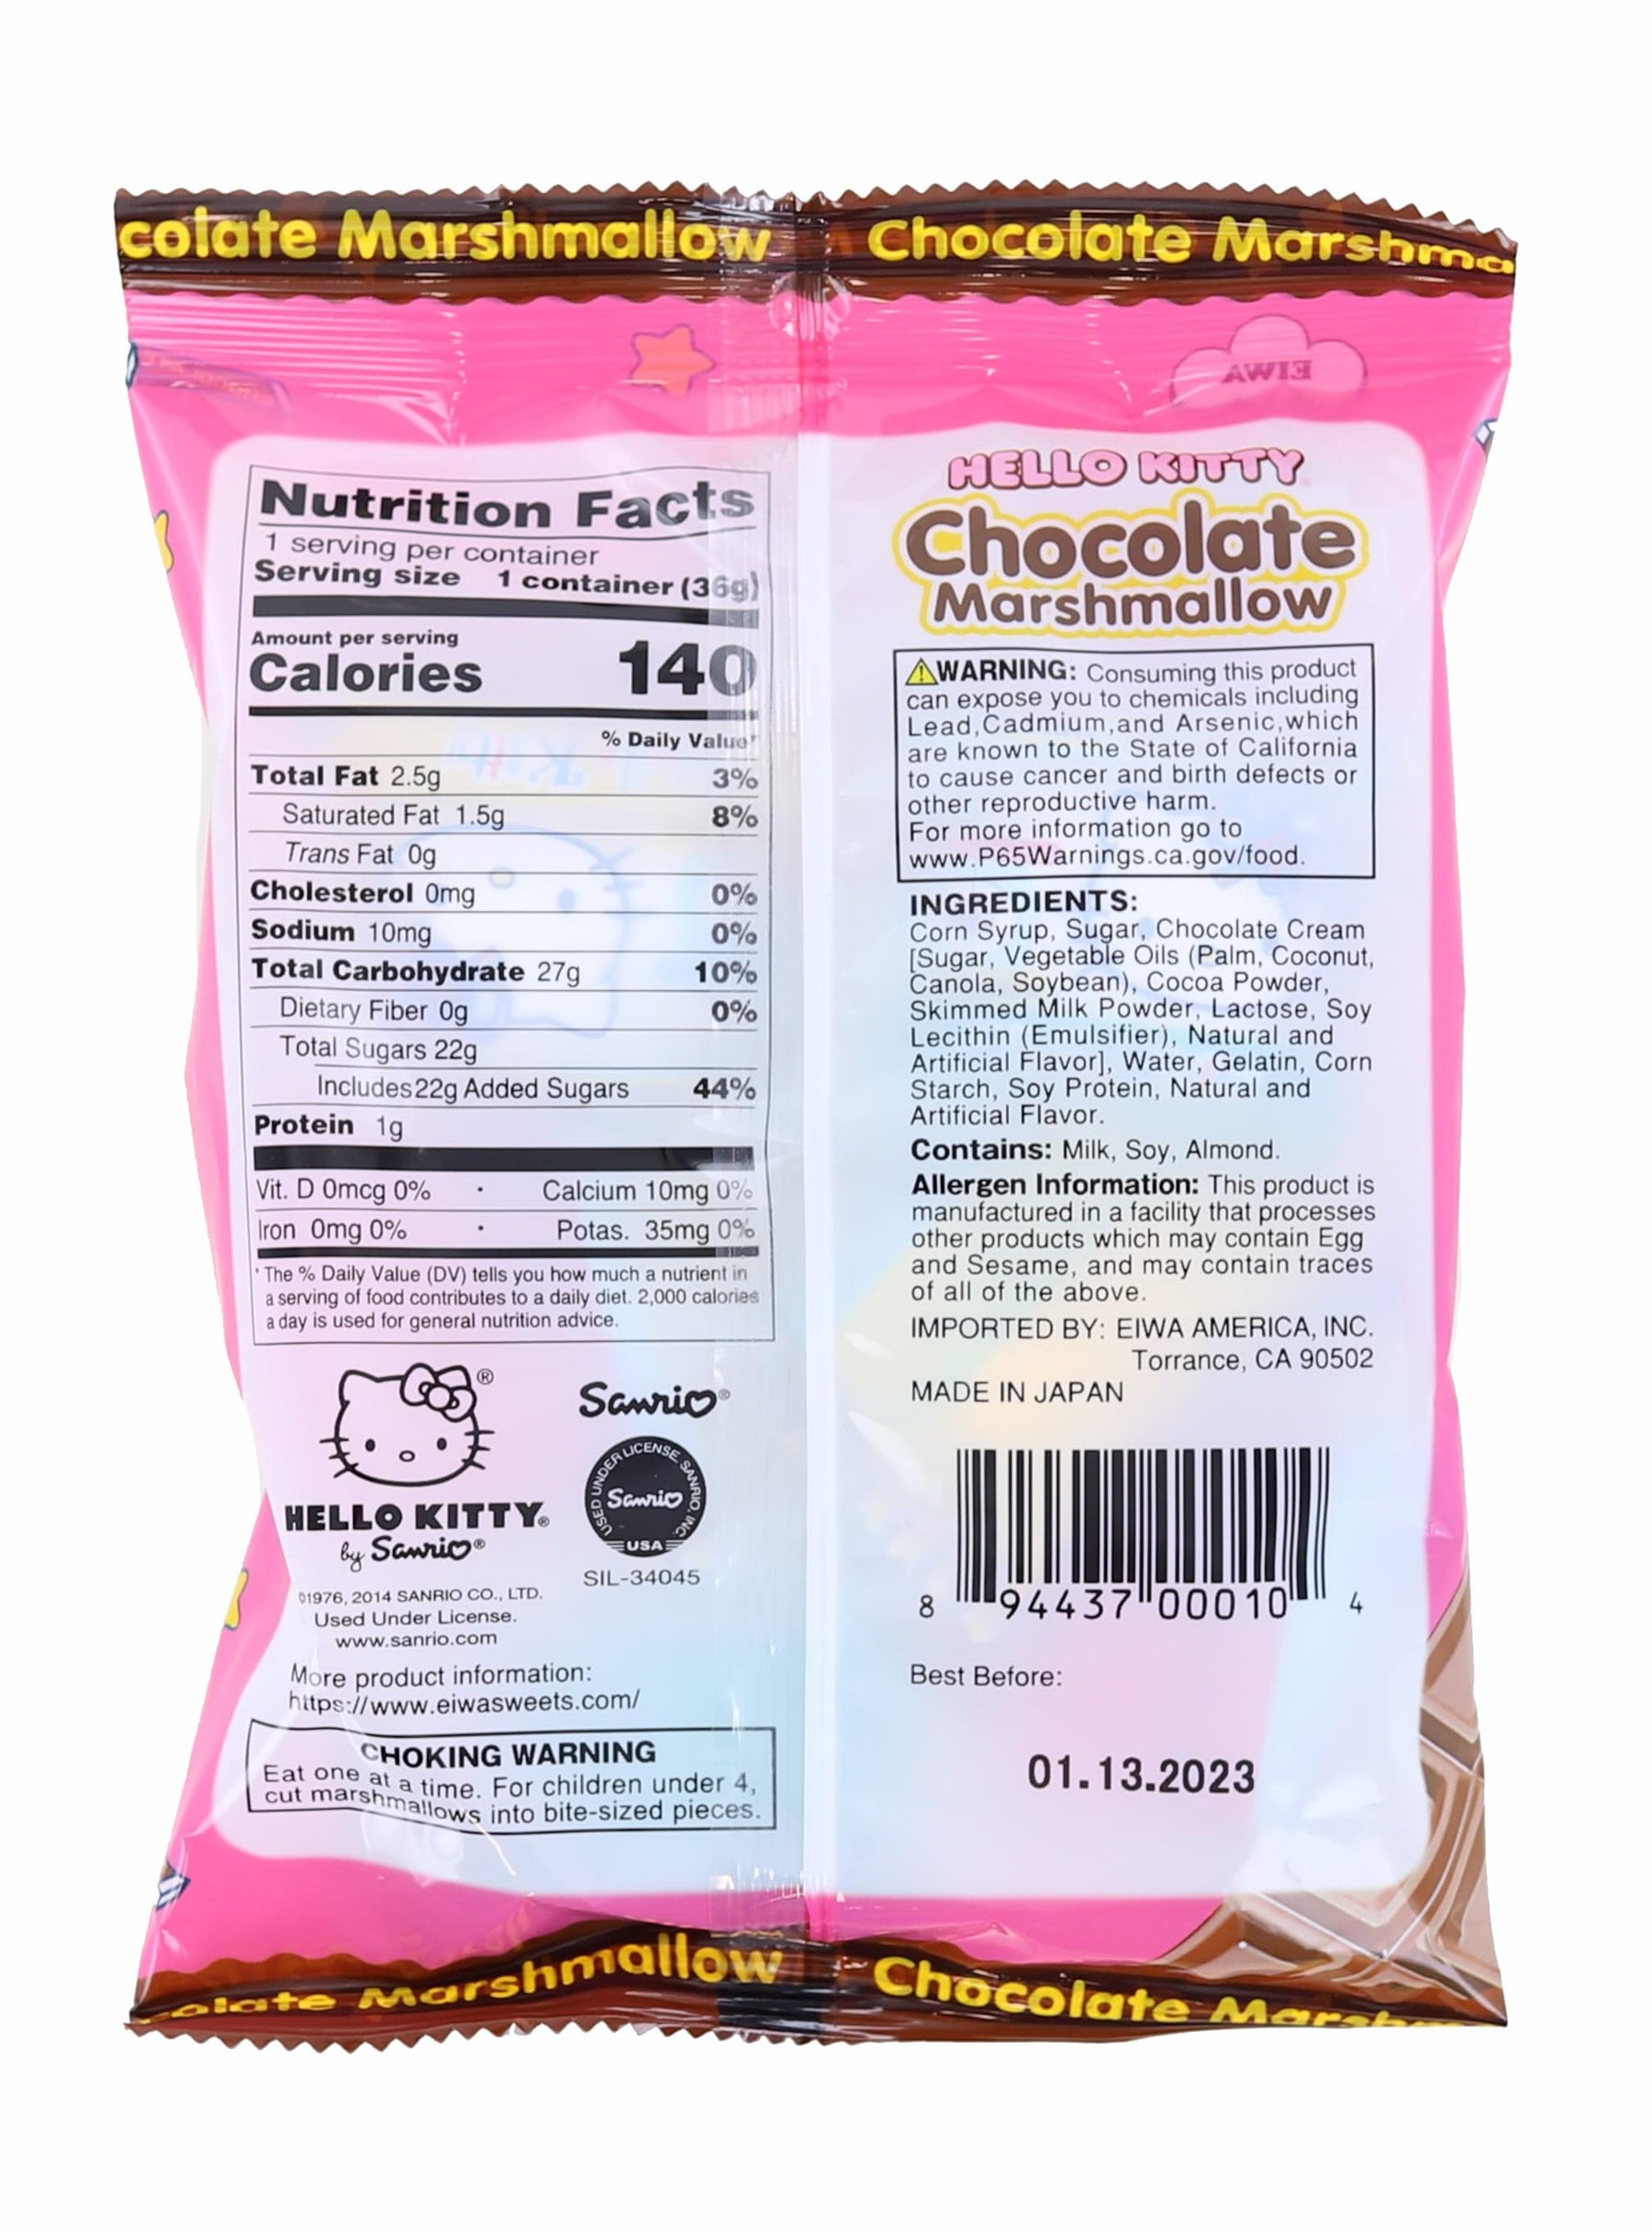 Hello Kitty Marshmallow Chocolate Filled Candy | 3.1 Ounce Pack